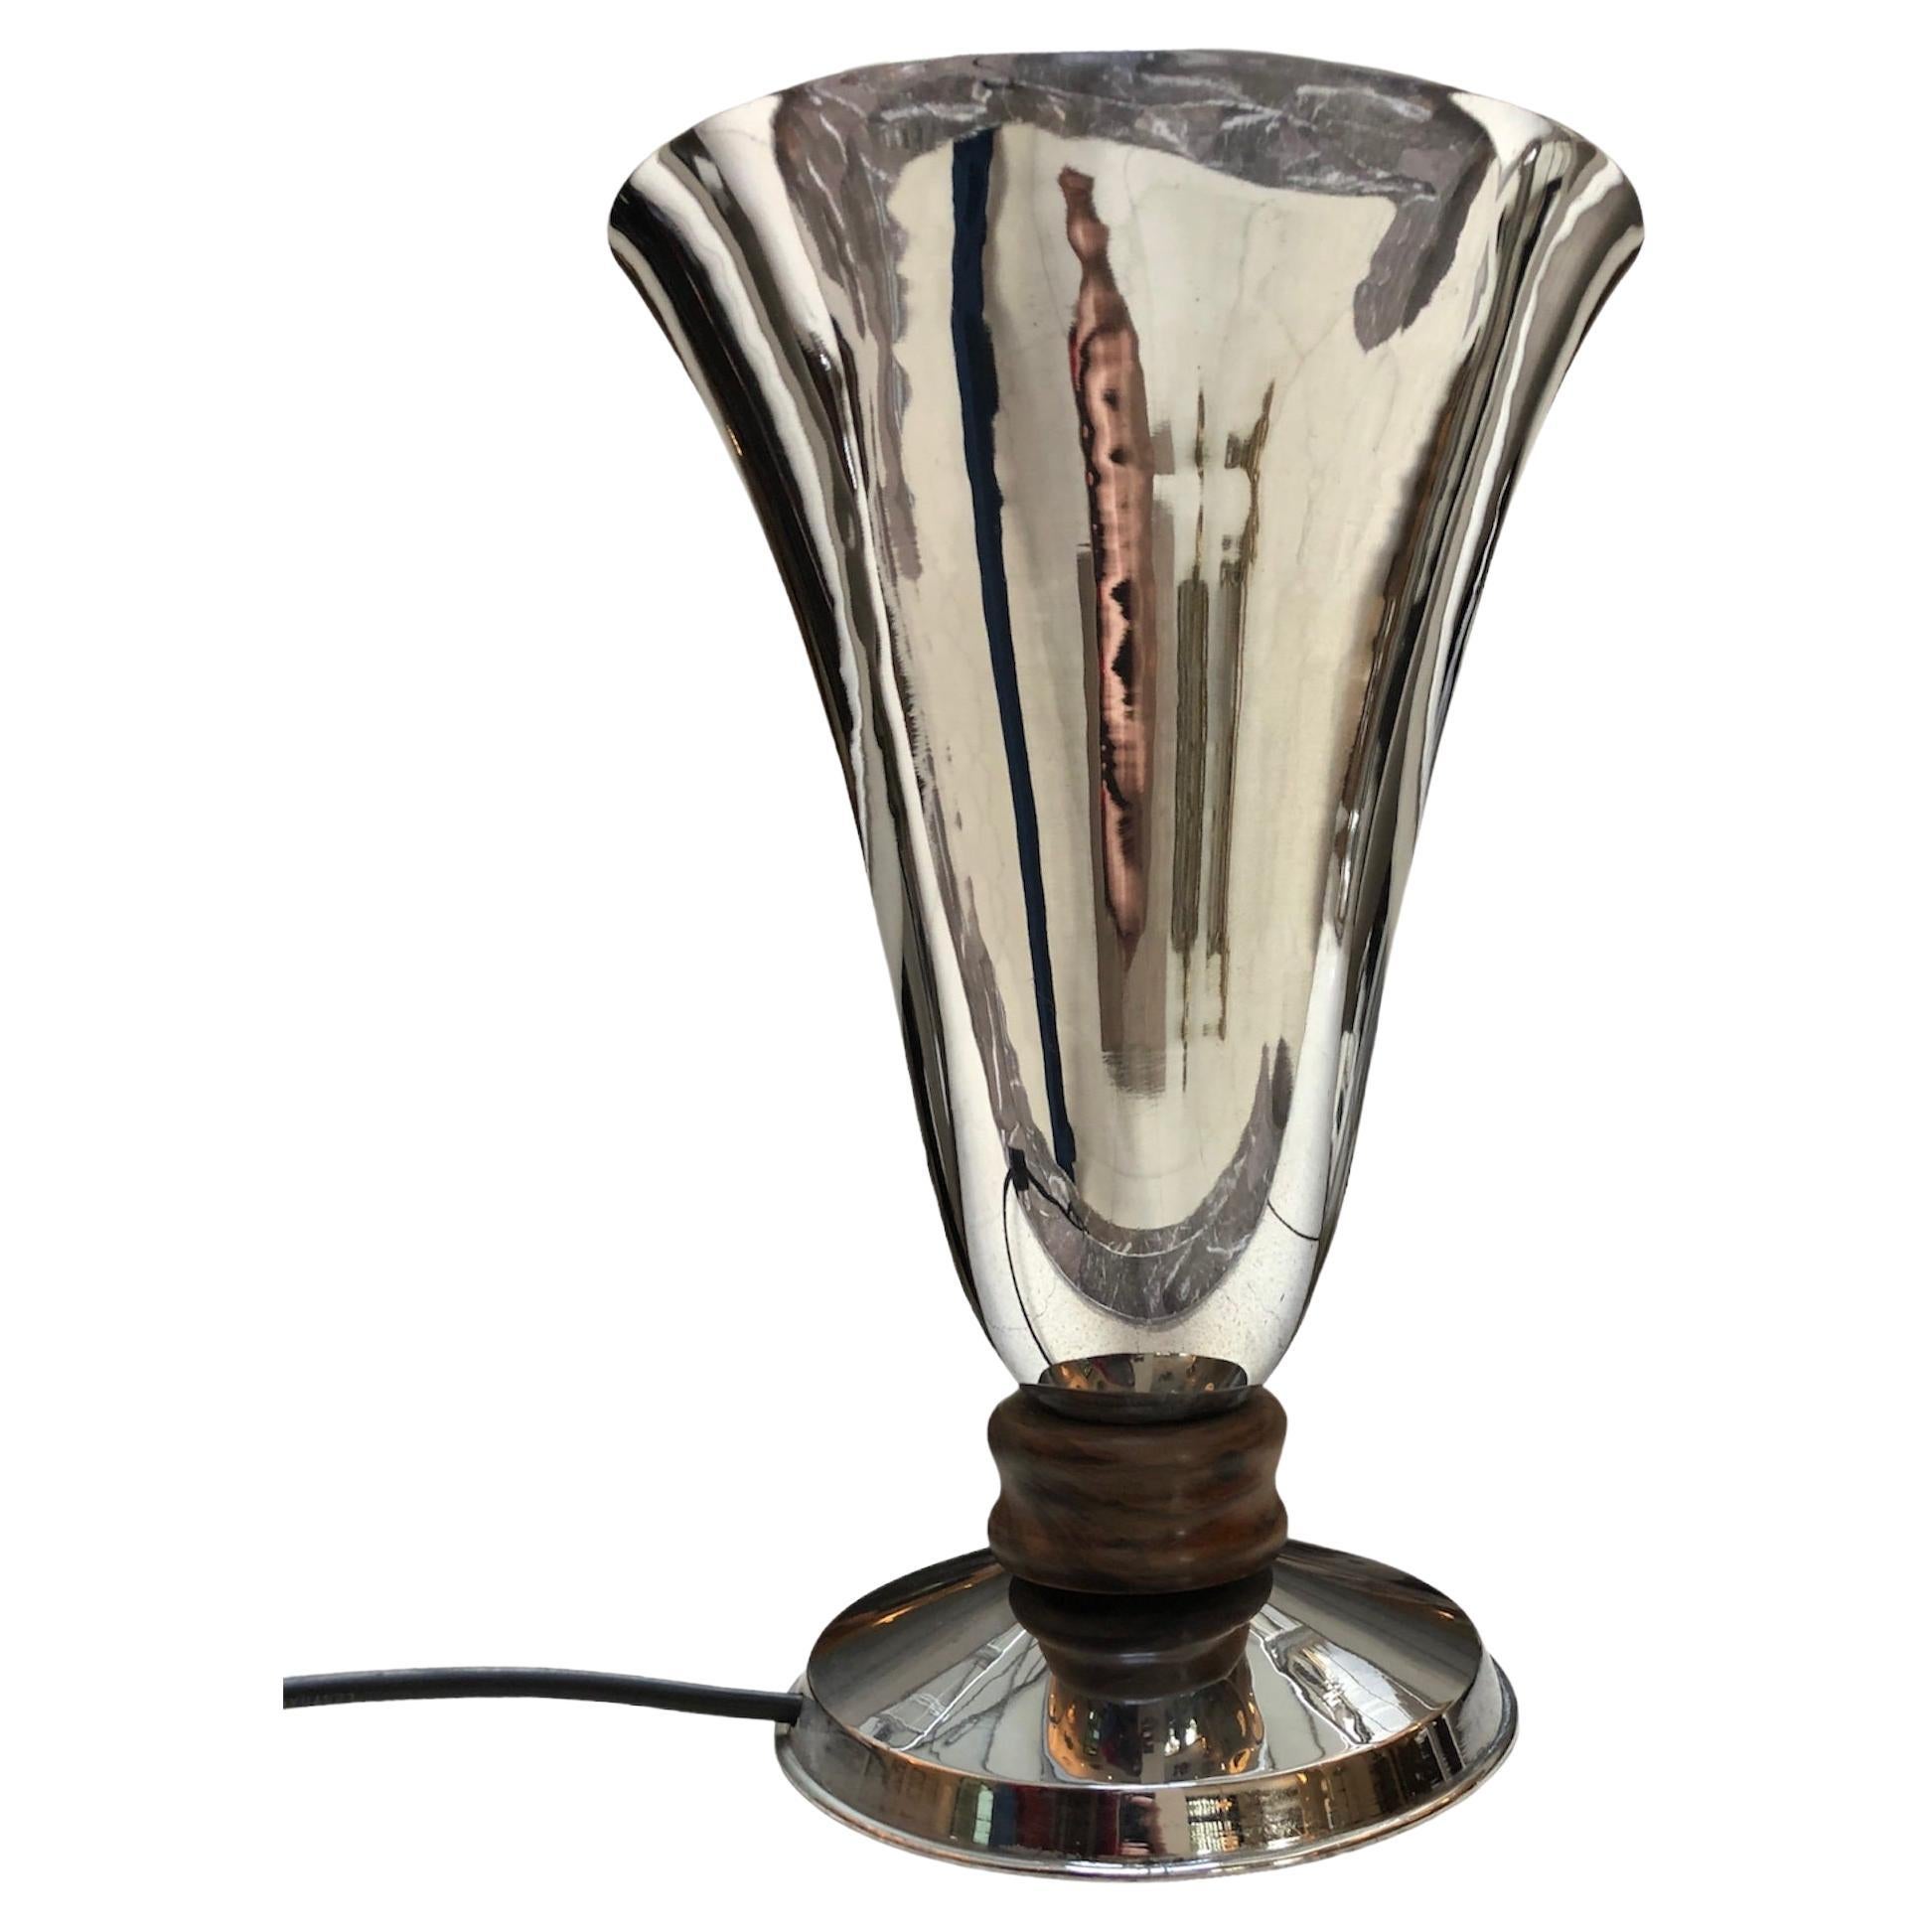 Art Deco Table Lamp 1920, France, Materials: Wood and Chrome